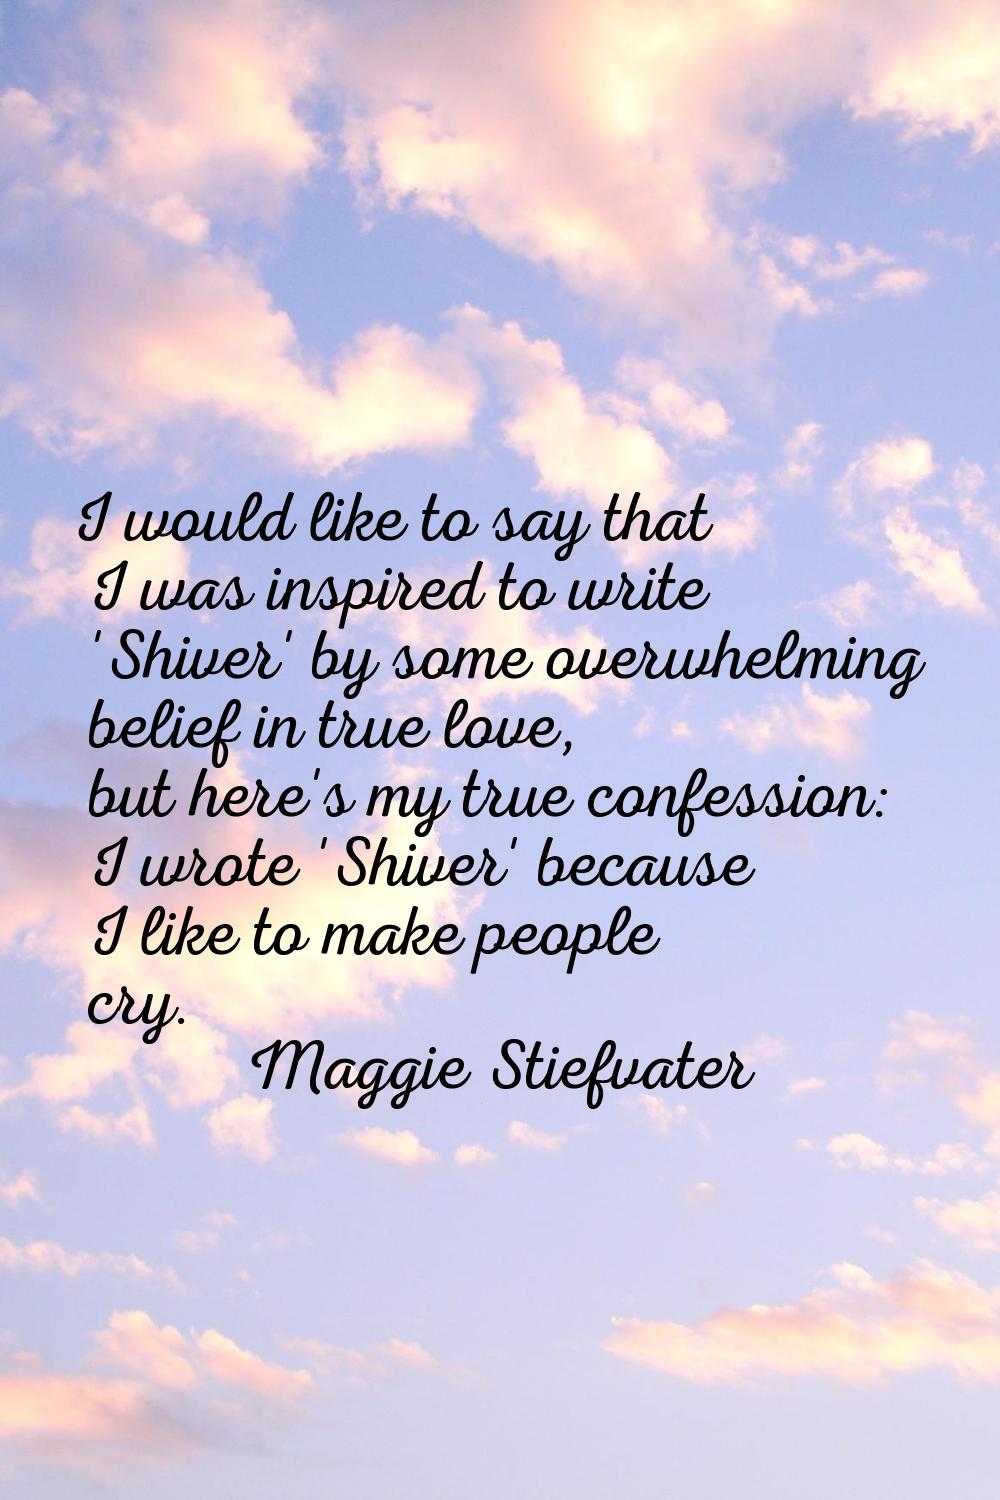 I would like to say that I was inspired to write 'Shiver' by some overwhelming belief in true love,